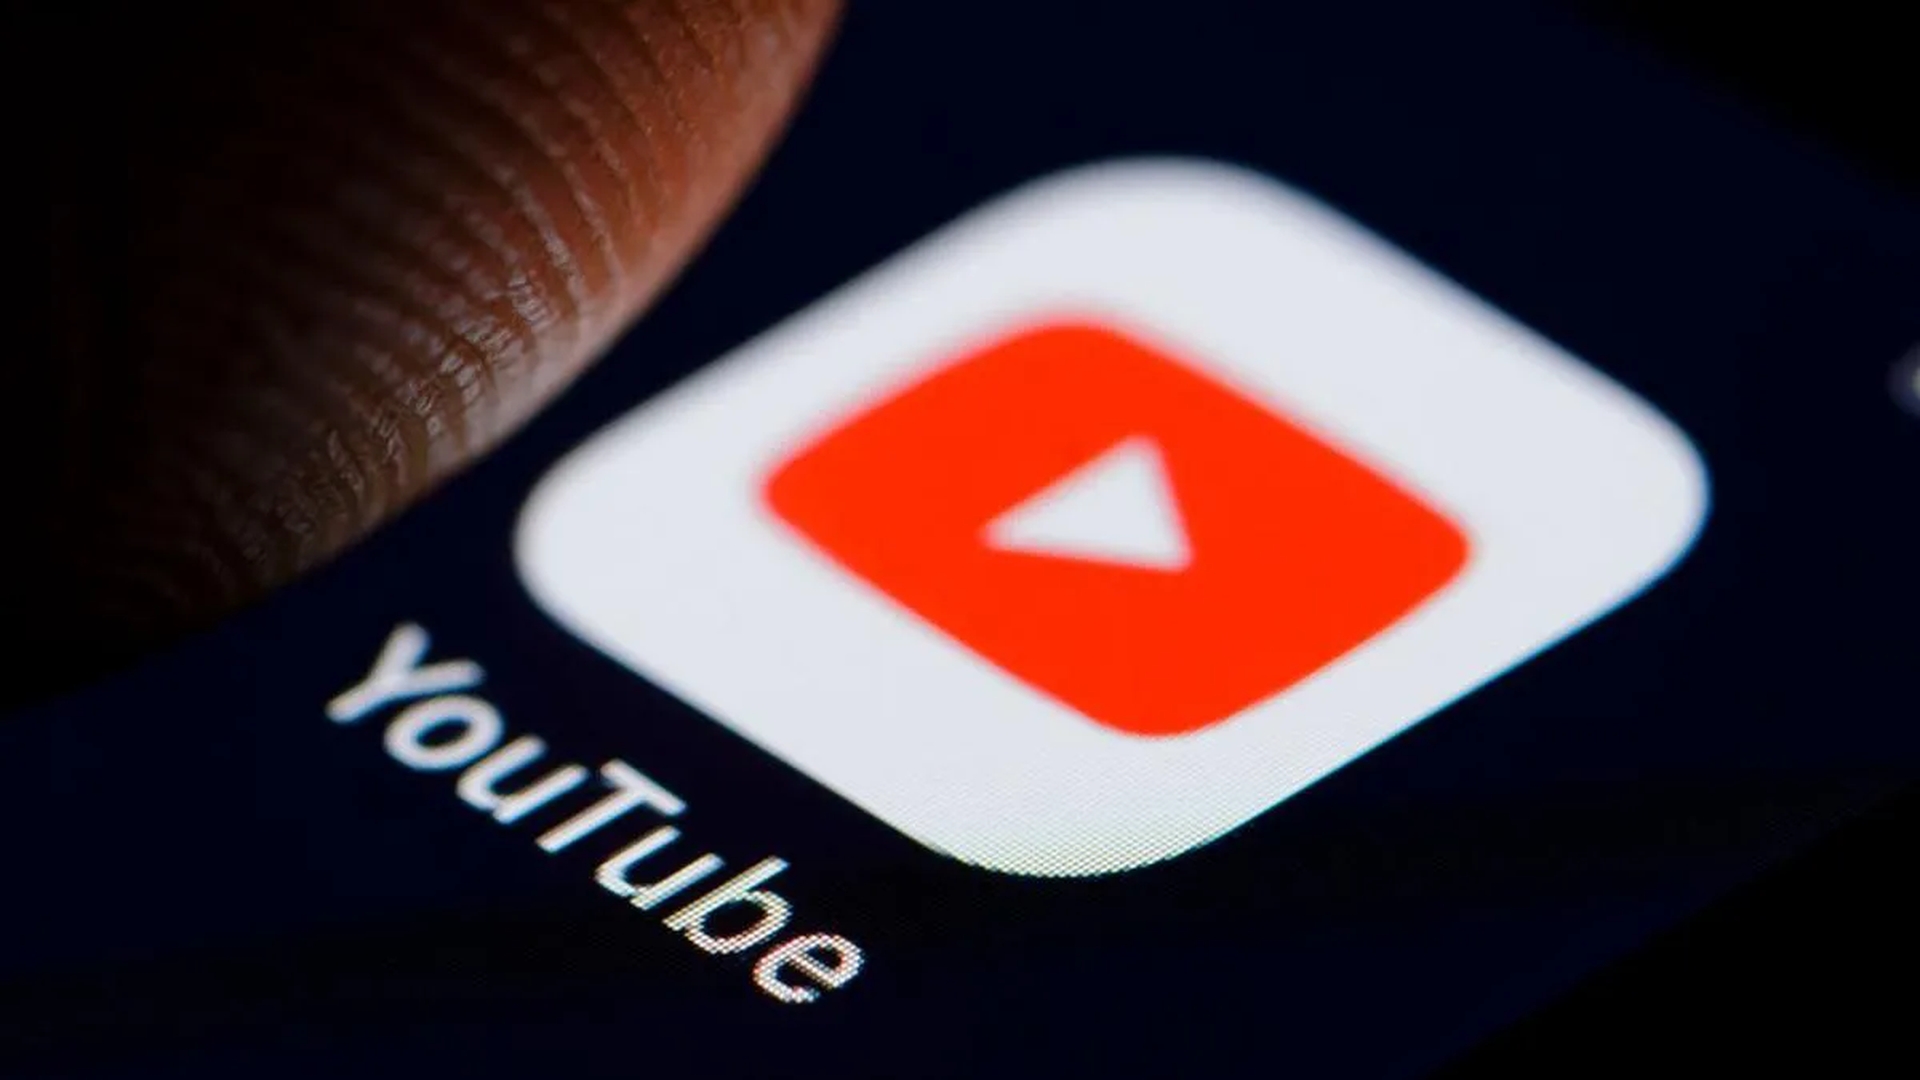 In this article, we are going to cover how to hide subscribers on Youtube, so you can make sure that your viewers don't see the number of subscribers you have.